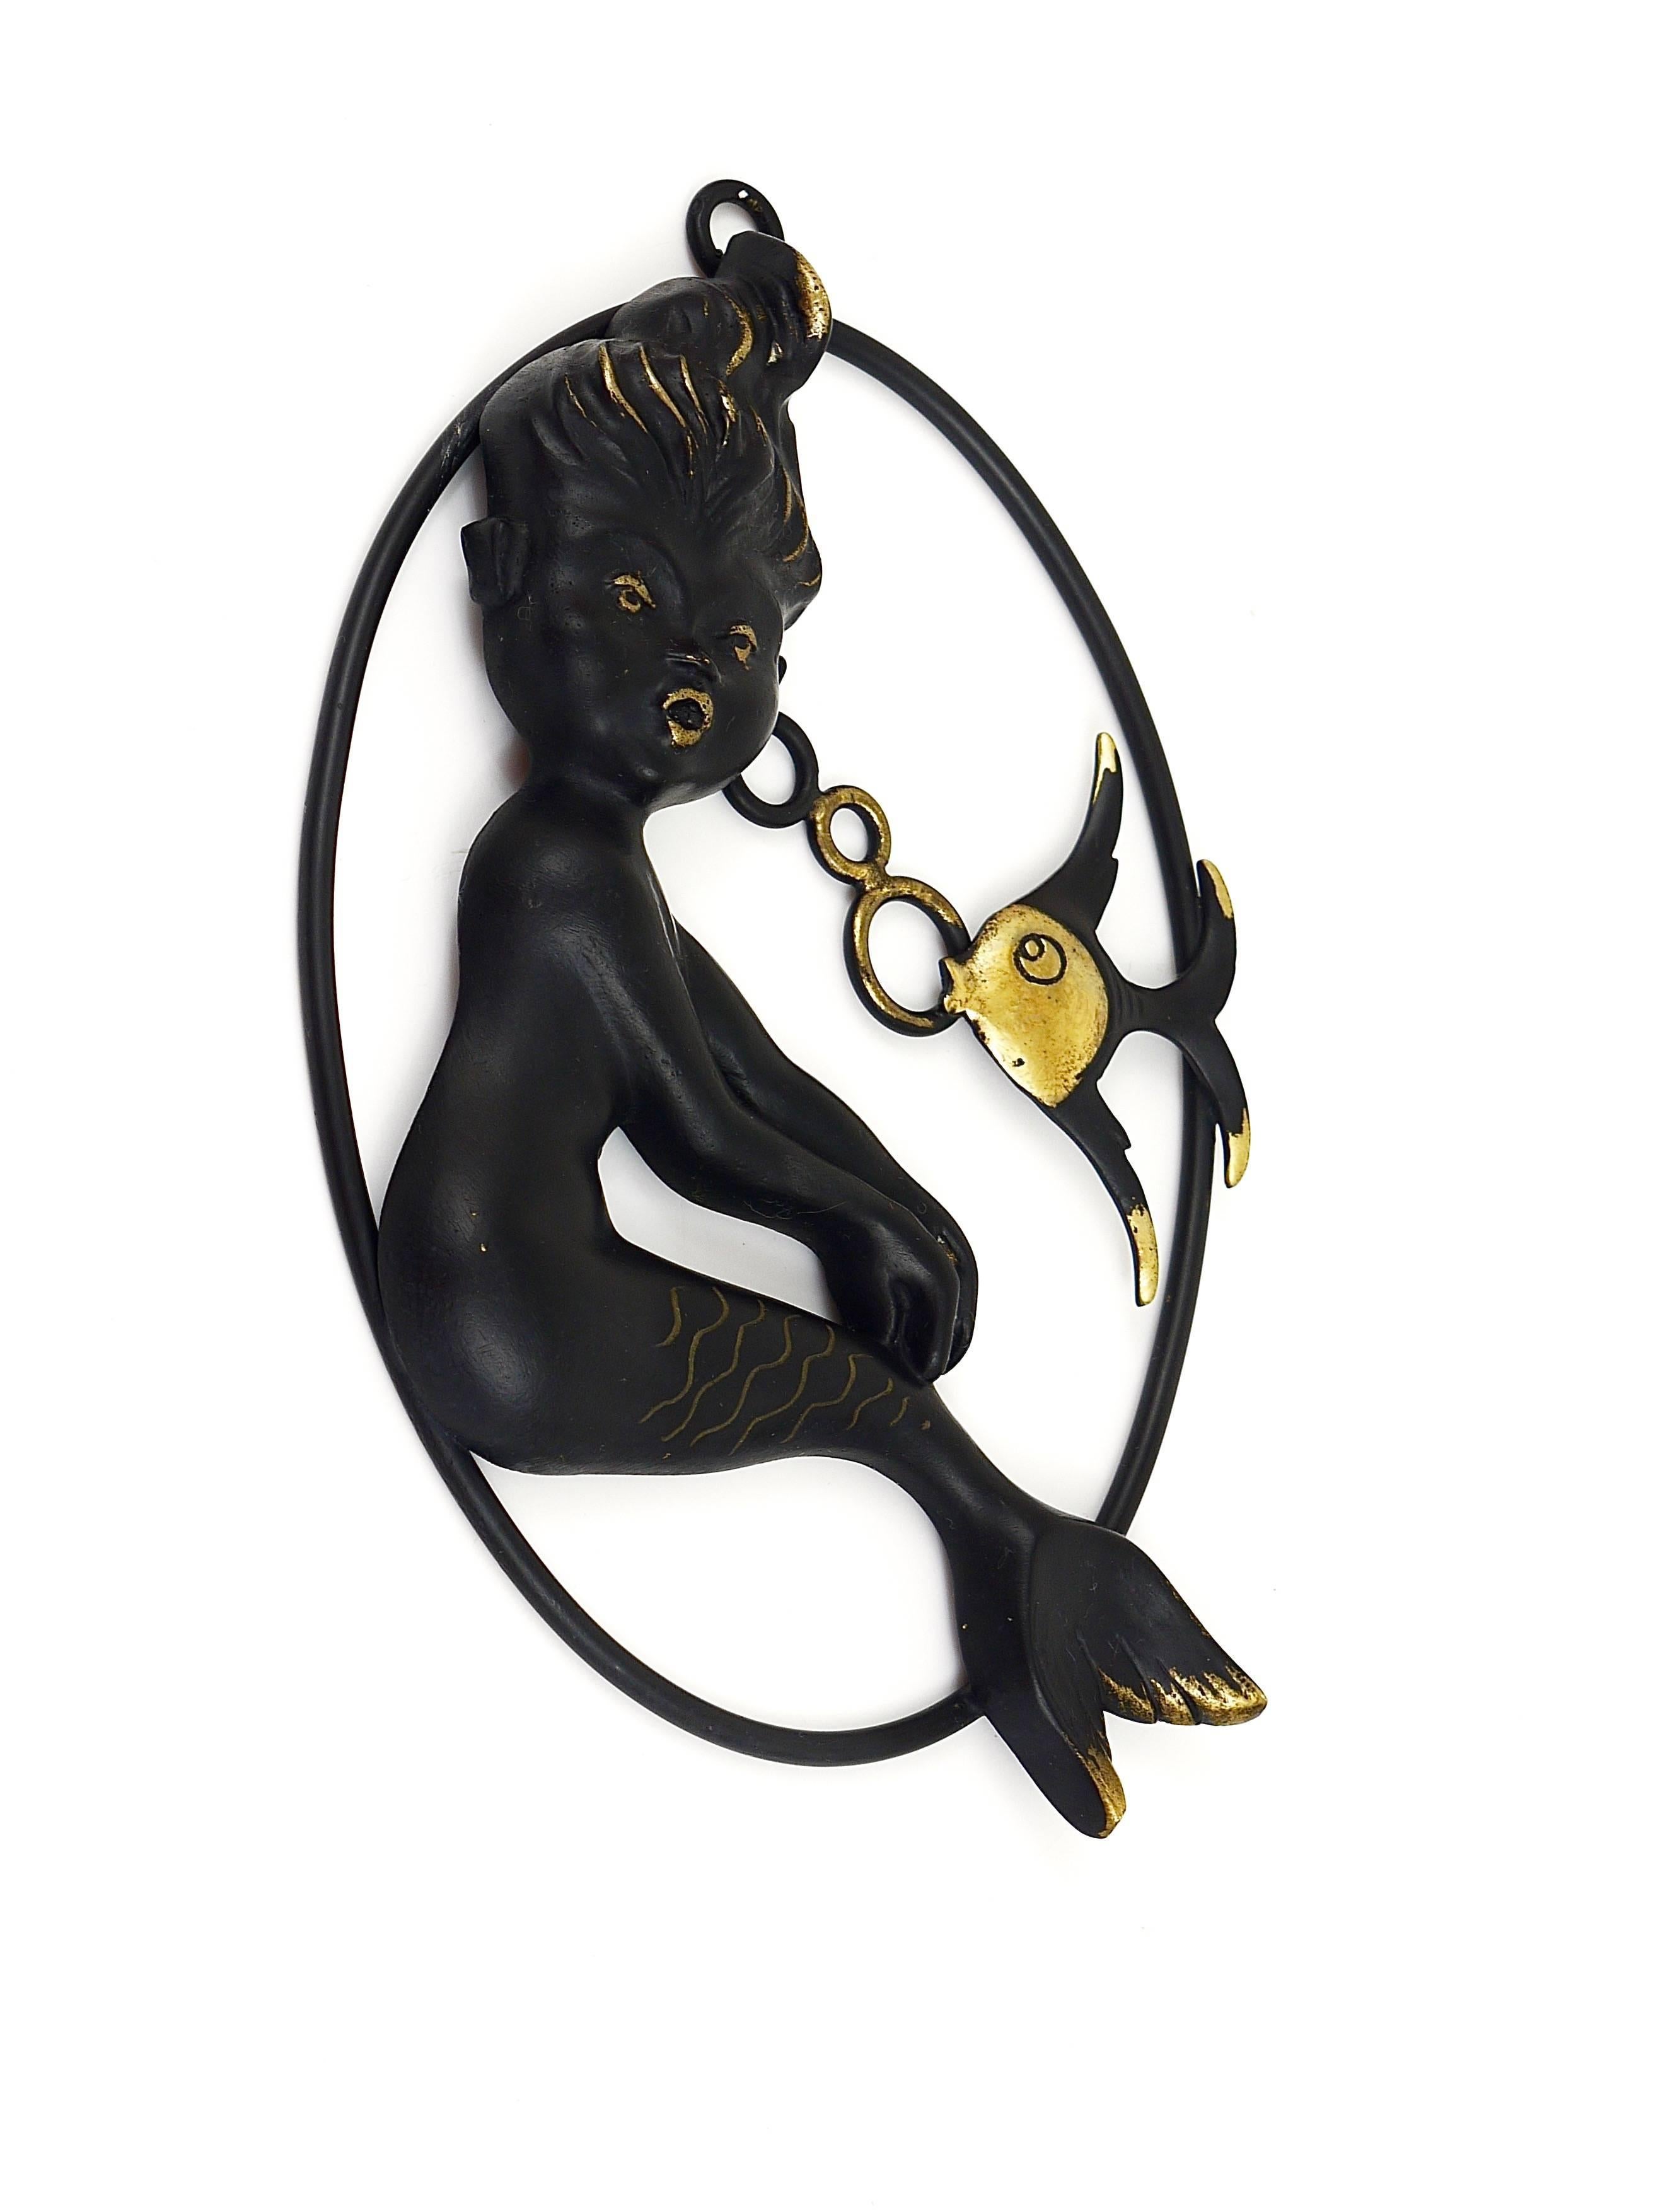 A lovely Mid-Century wall-mounted brass sculpture, displaying a mermaid and a fish on a frame, made of black-finished brass. Designed by Walter Bosse, manufactured in the 1950s by Hertha Baller, Austria. In excellent condition. A very decorative